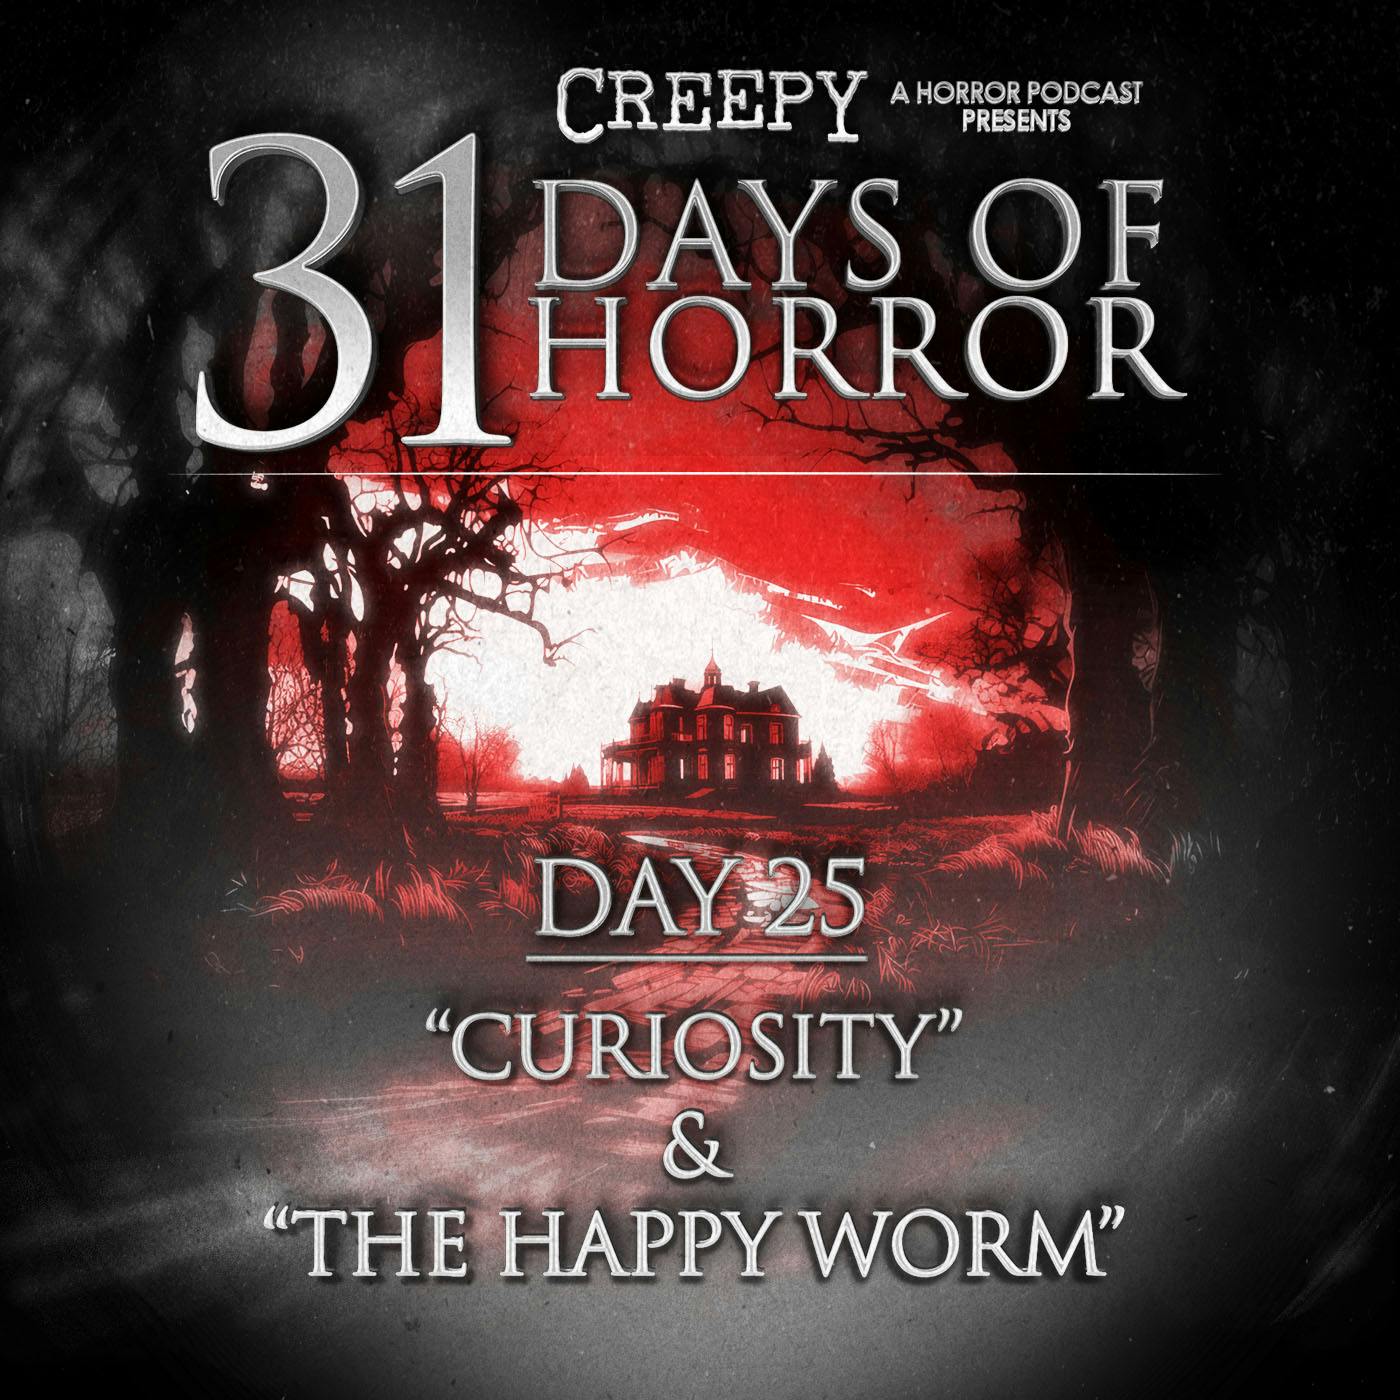 Day 25 - Curiosity & The Happy Worm